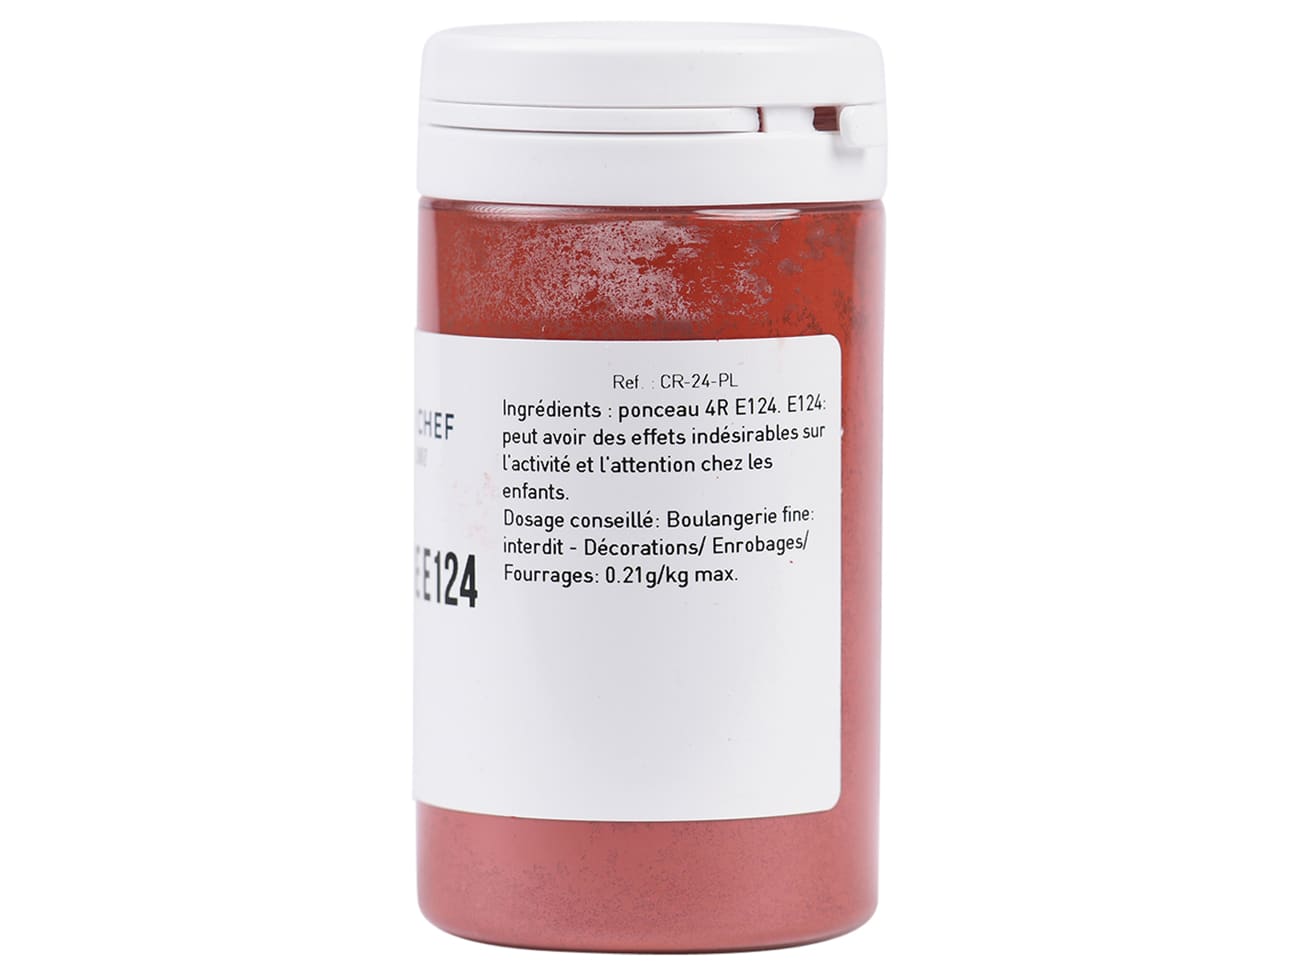 Red food colouring E124 - Powder water soluble - BienManger Arômes